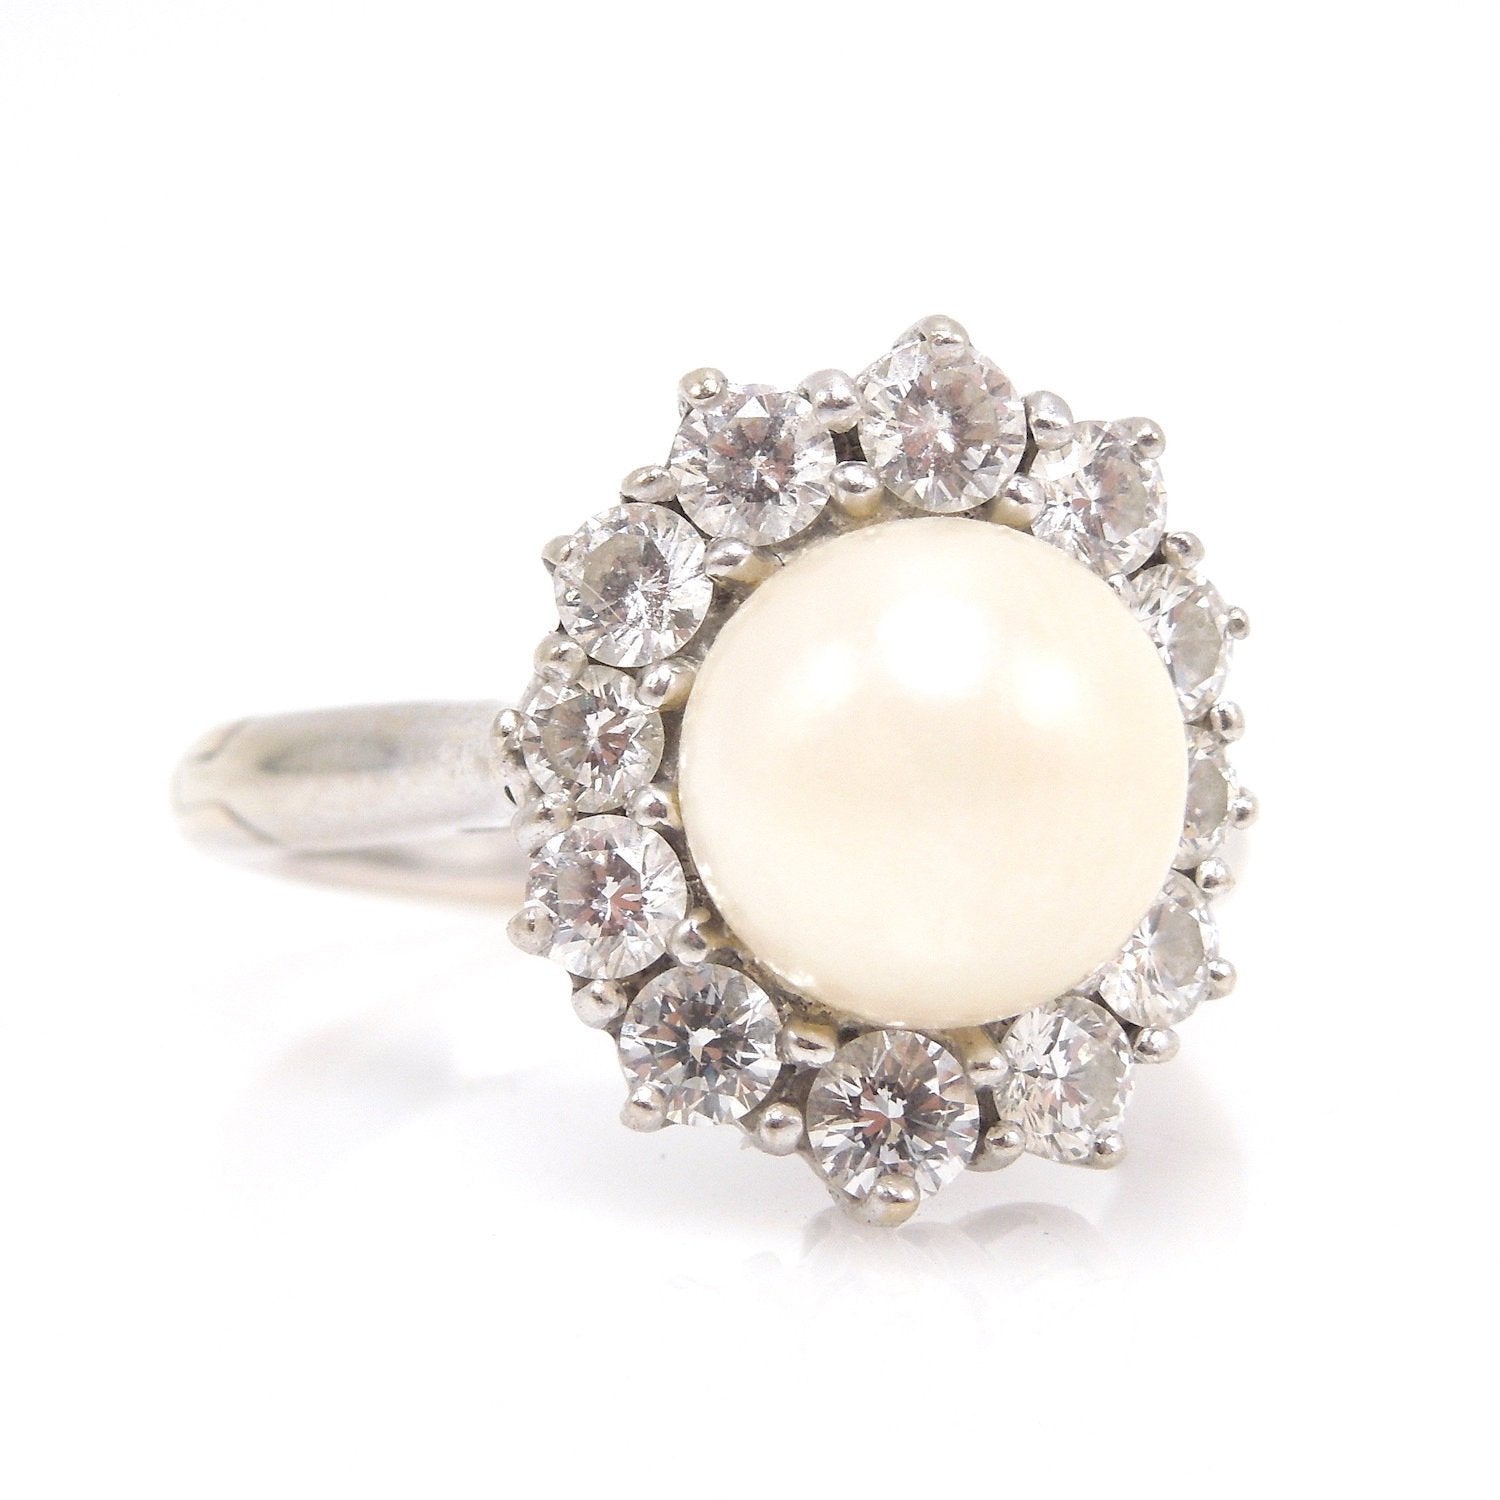 8mm White-Yellow Pearl Surrounded by Halo of 0.76ct Diamonds – A.J. Martin